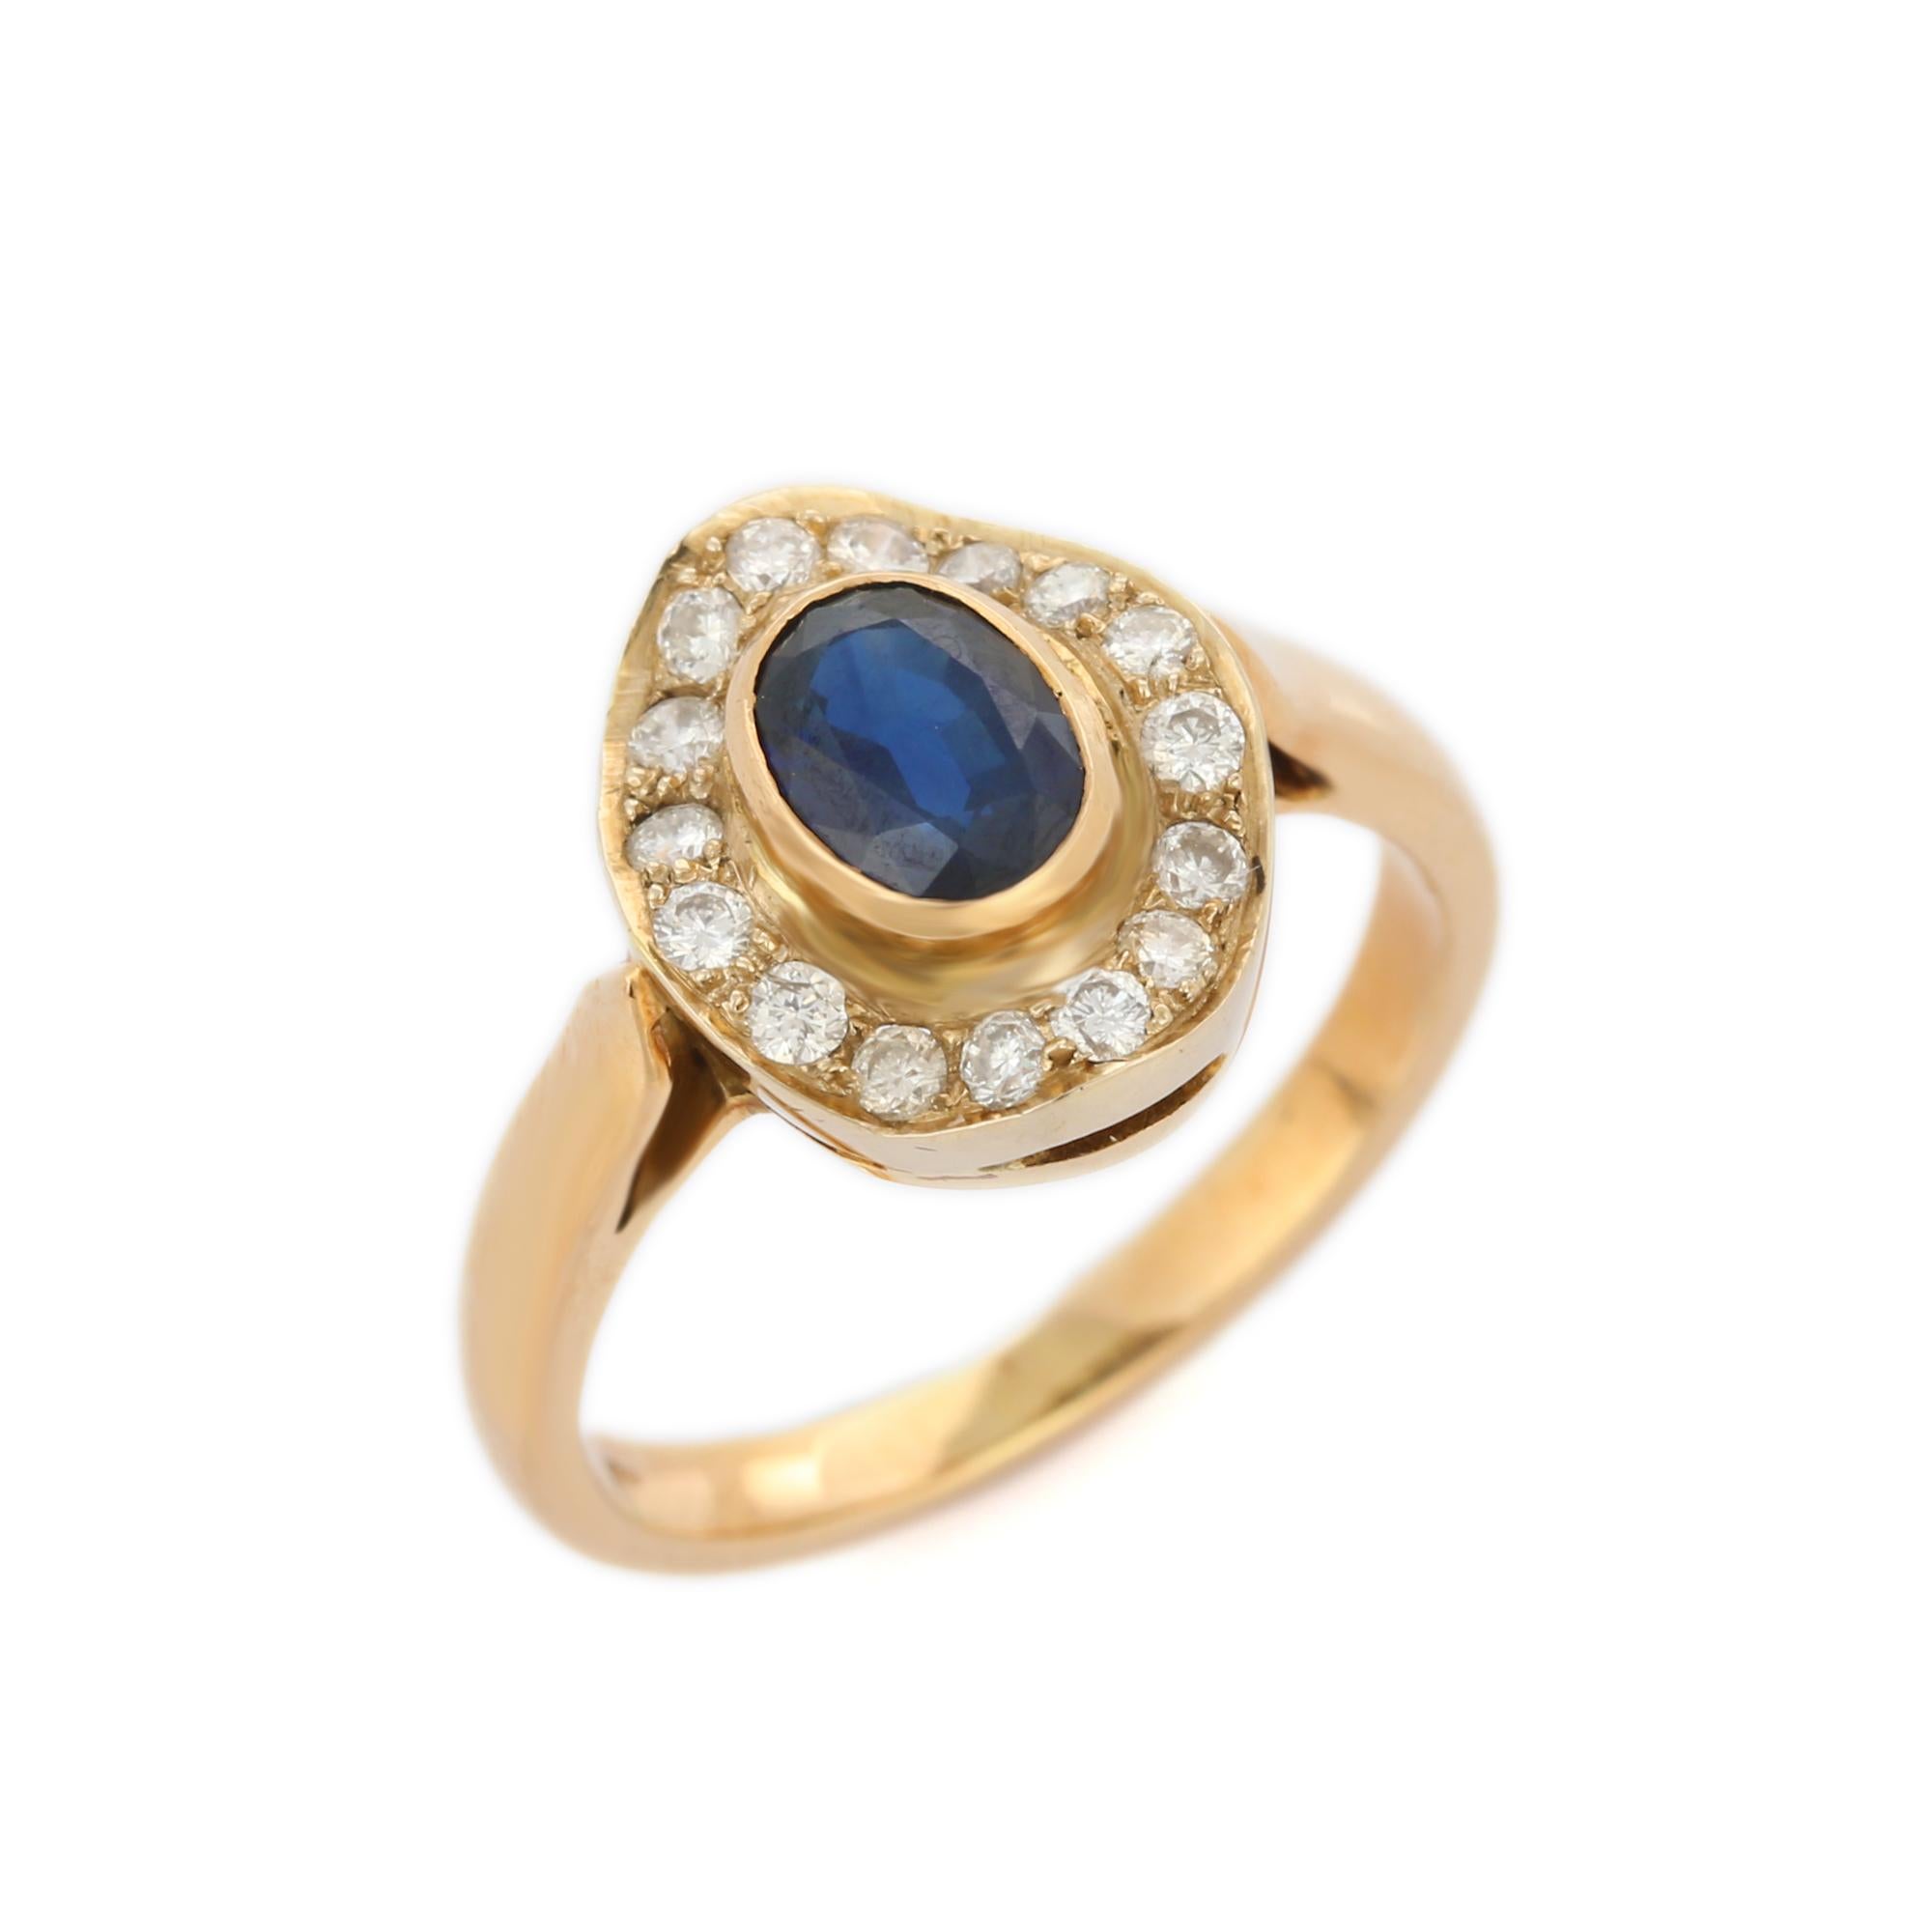 For Sale:  Alluring 18K Solid Yellow Gold Blue Sapphire Diamond Ring, Yellow Gold Ring 5